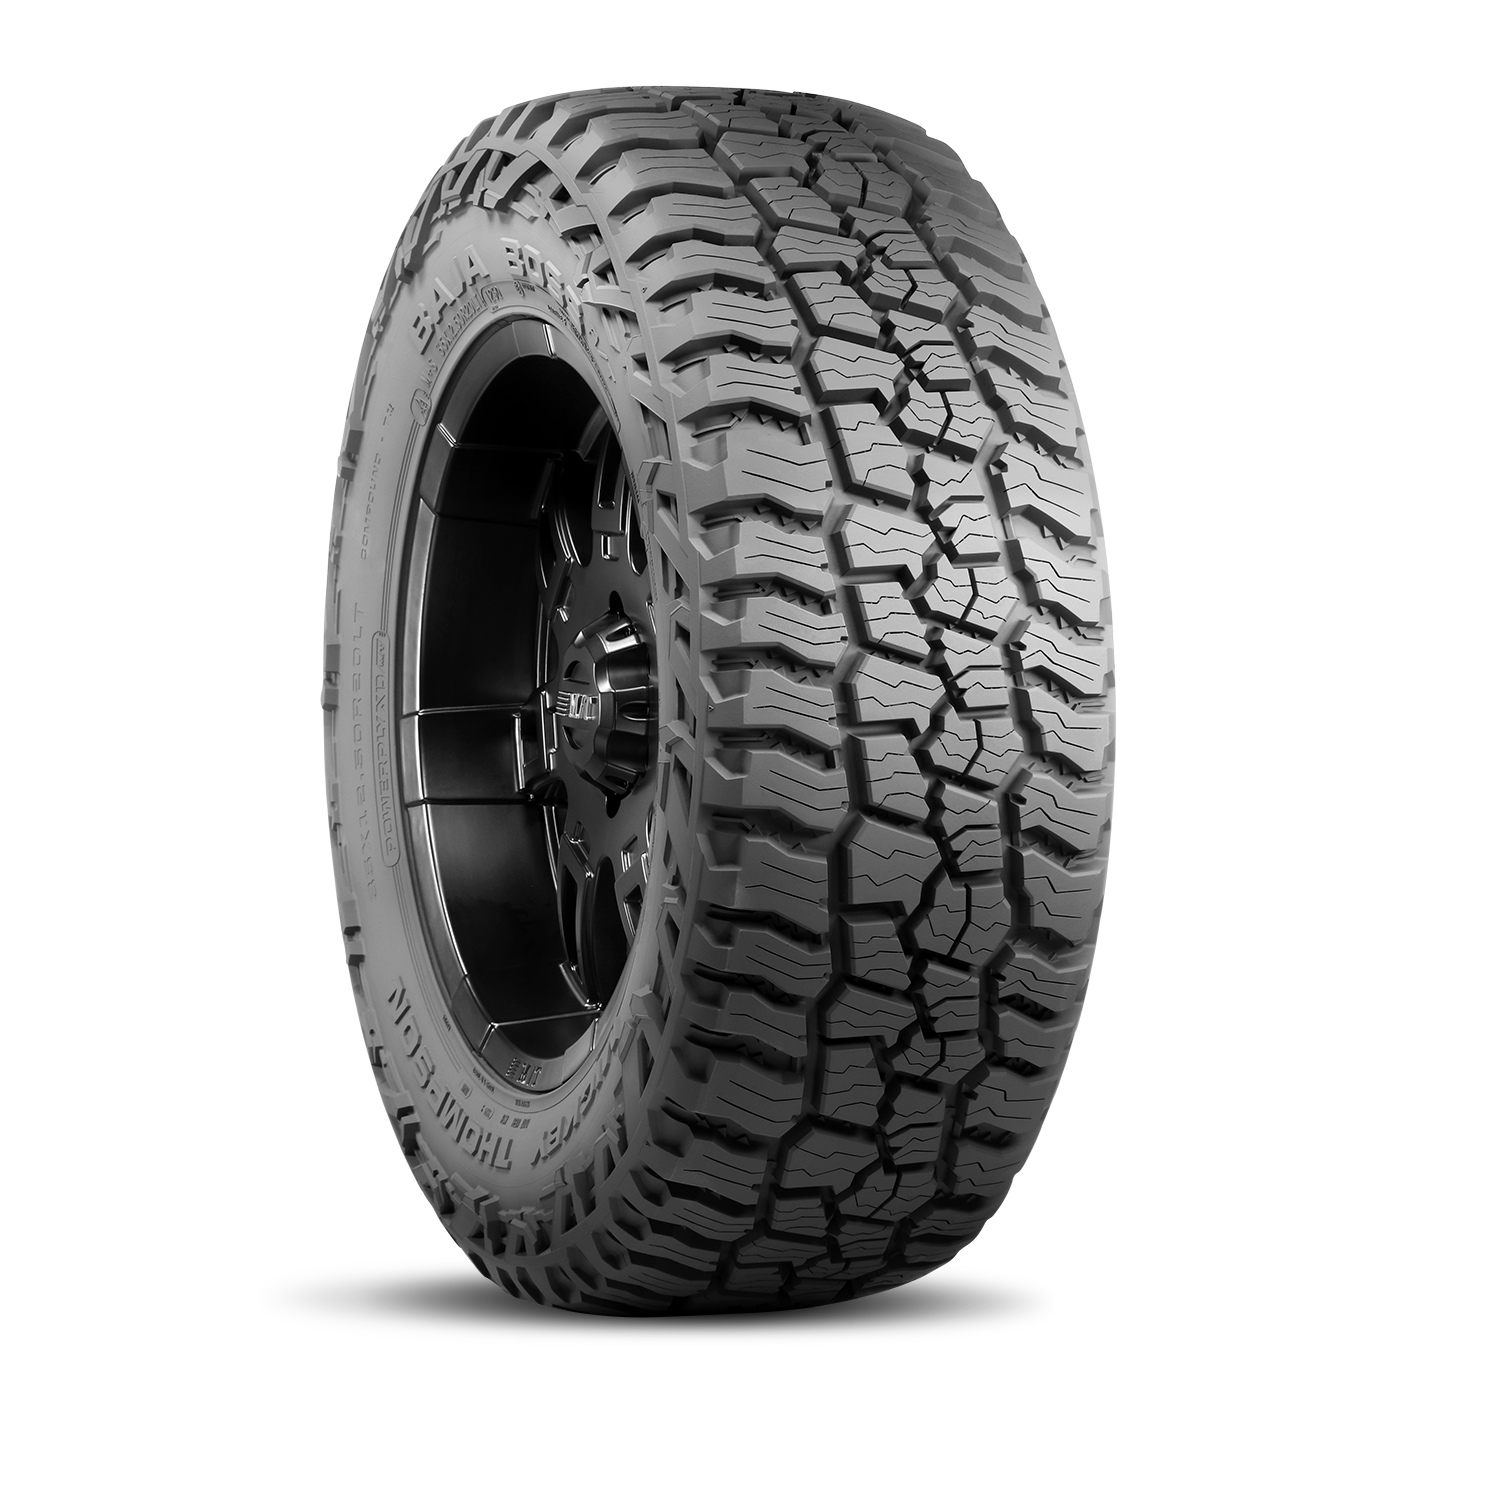 235/75R15 XL 109T MICKEY THOMPSON BAJA BOSS AT ALL-WEATHER TIRES (M+S + SNOWFLAKE)